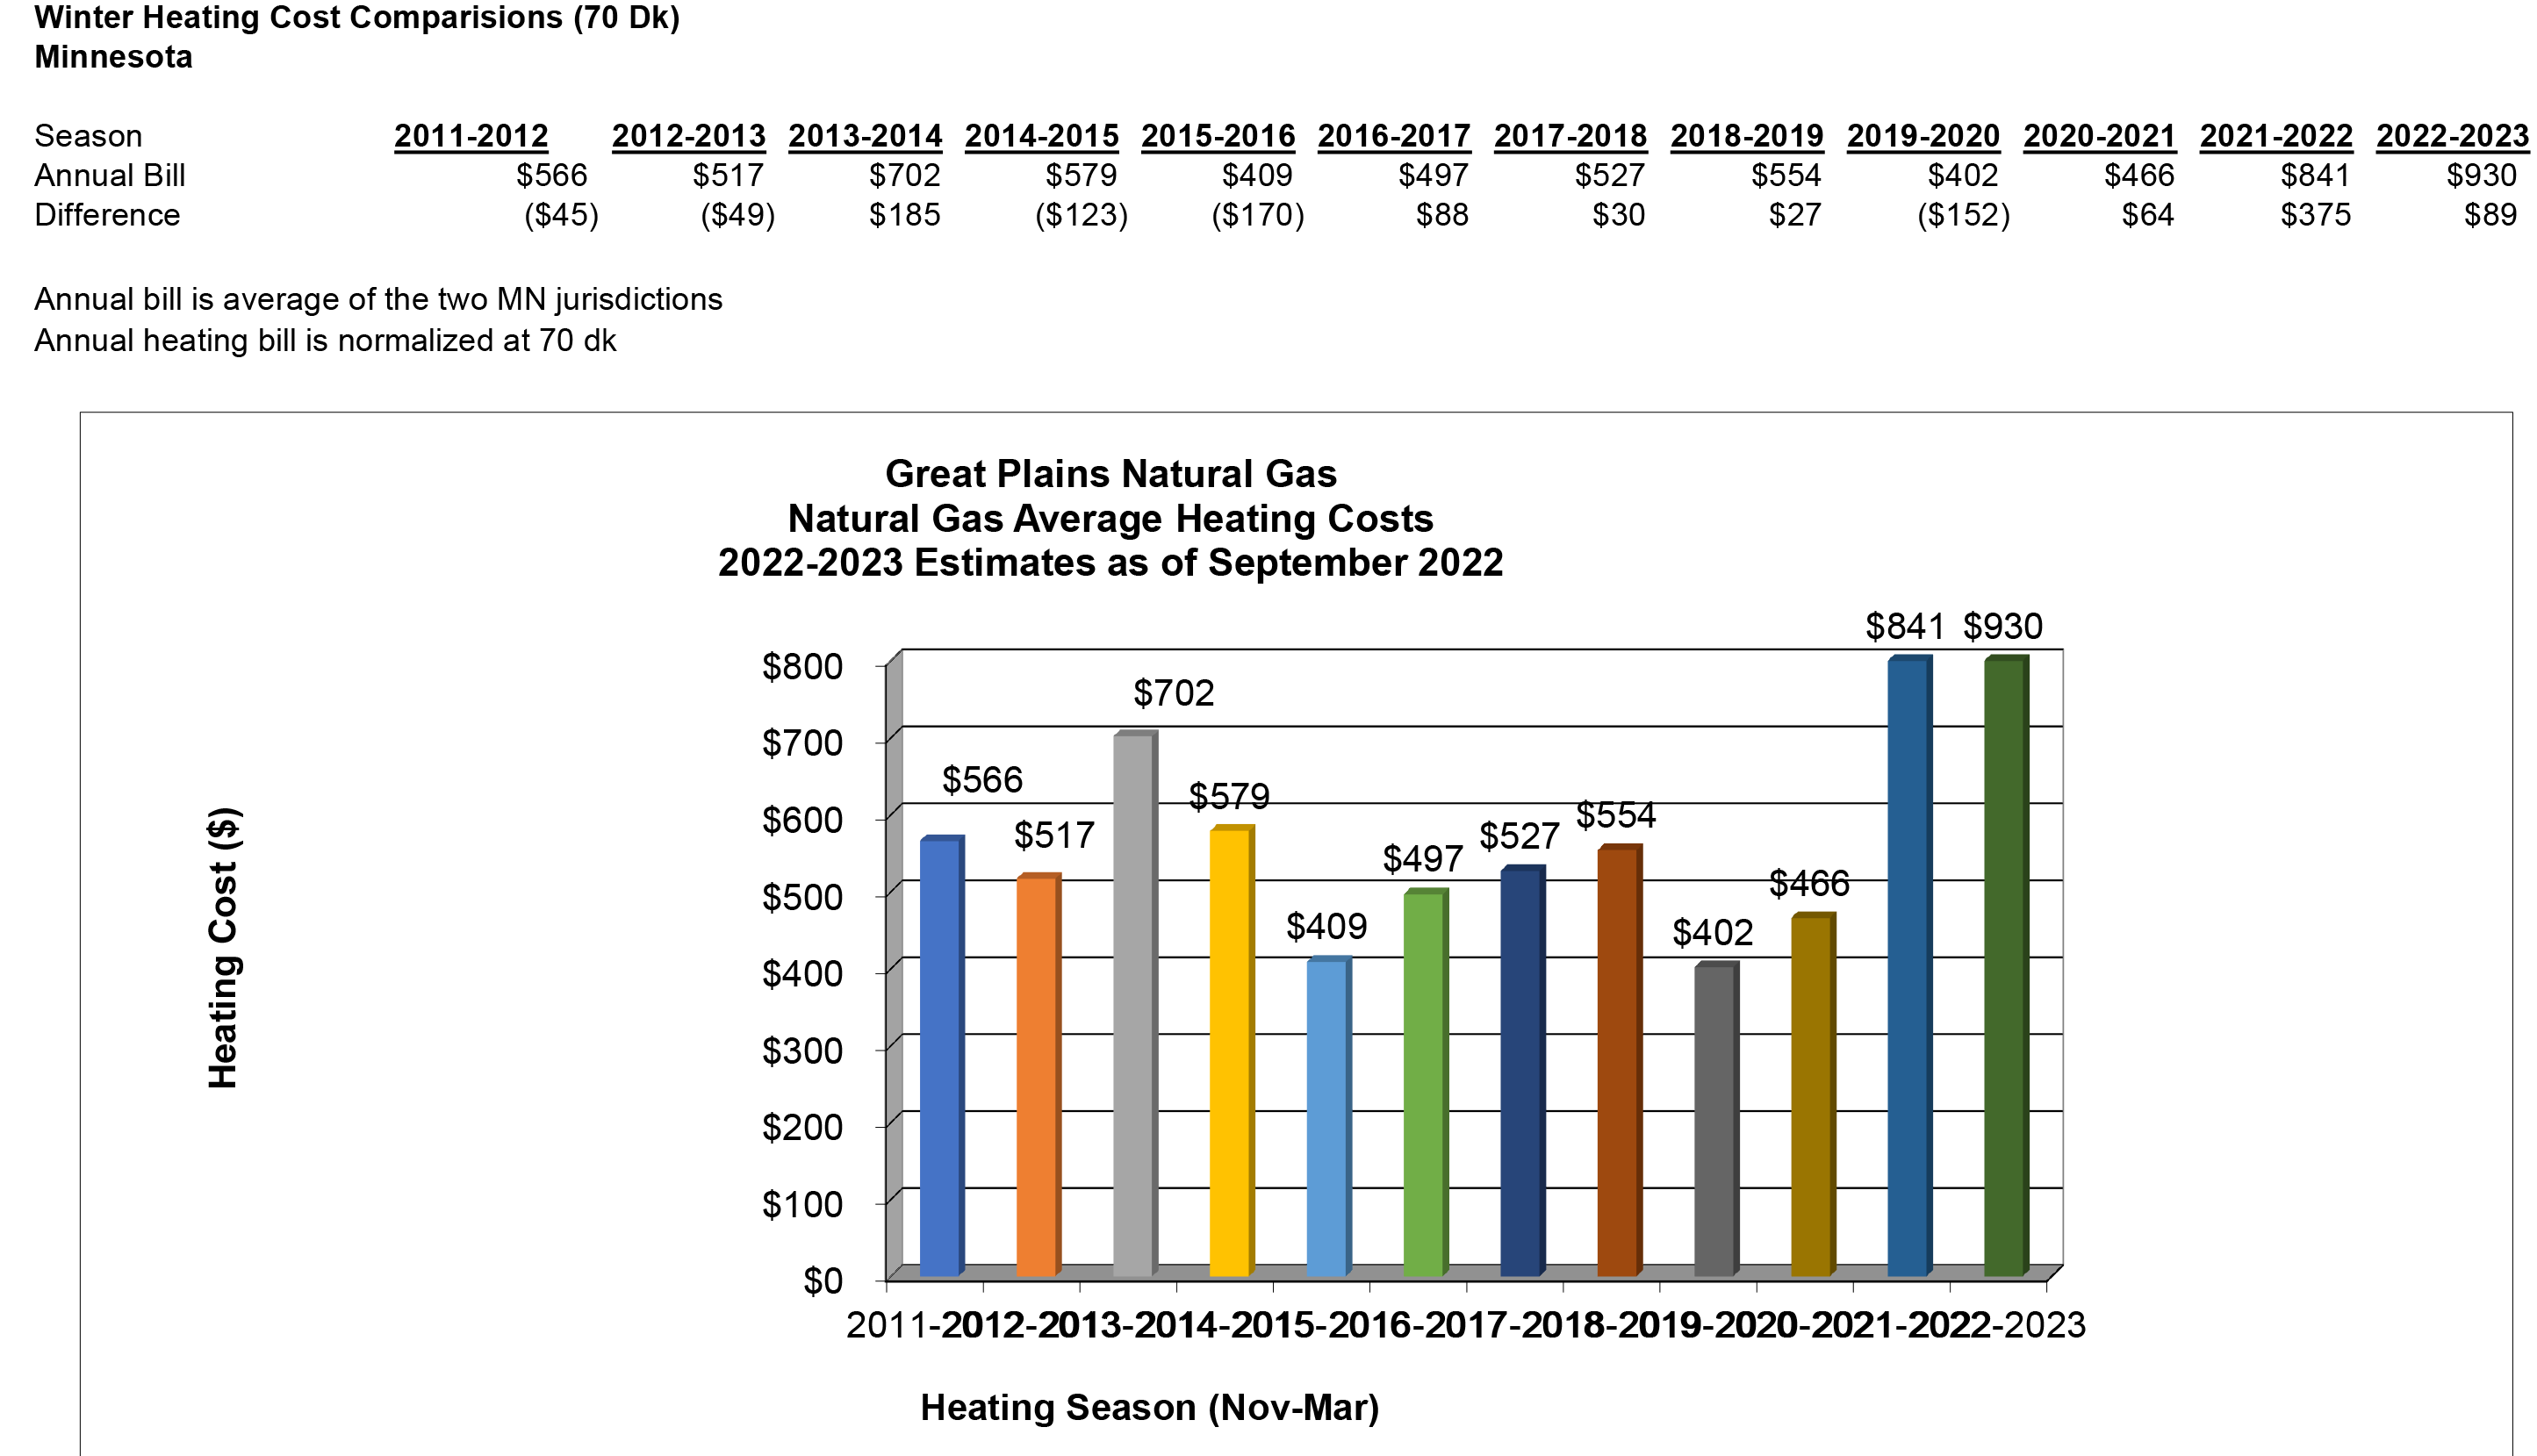 Gas-Price-Projections-Winter-2022-2023-Great-Plains-mn